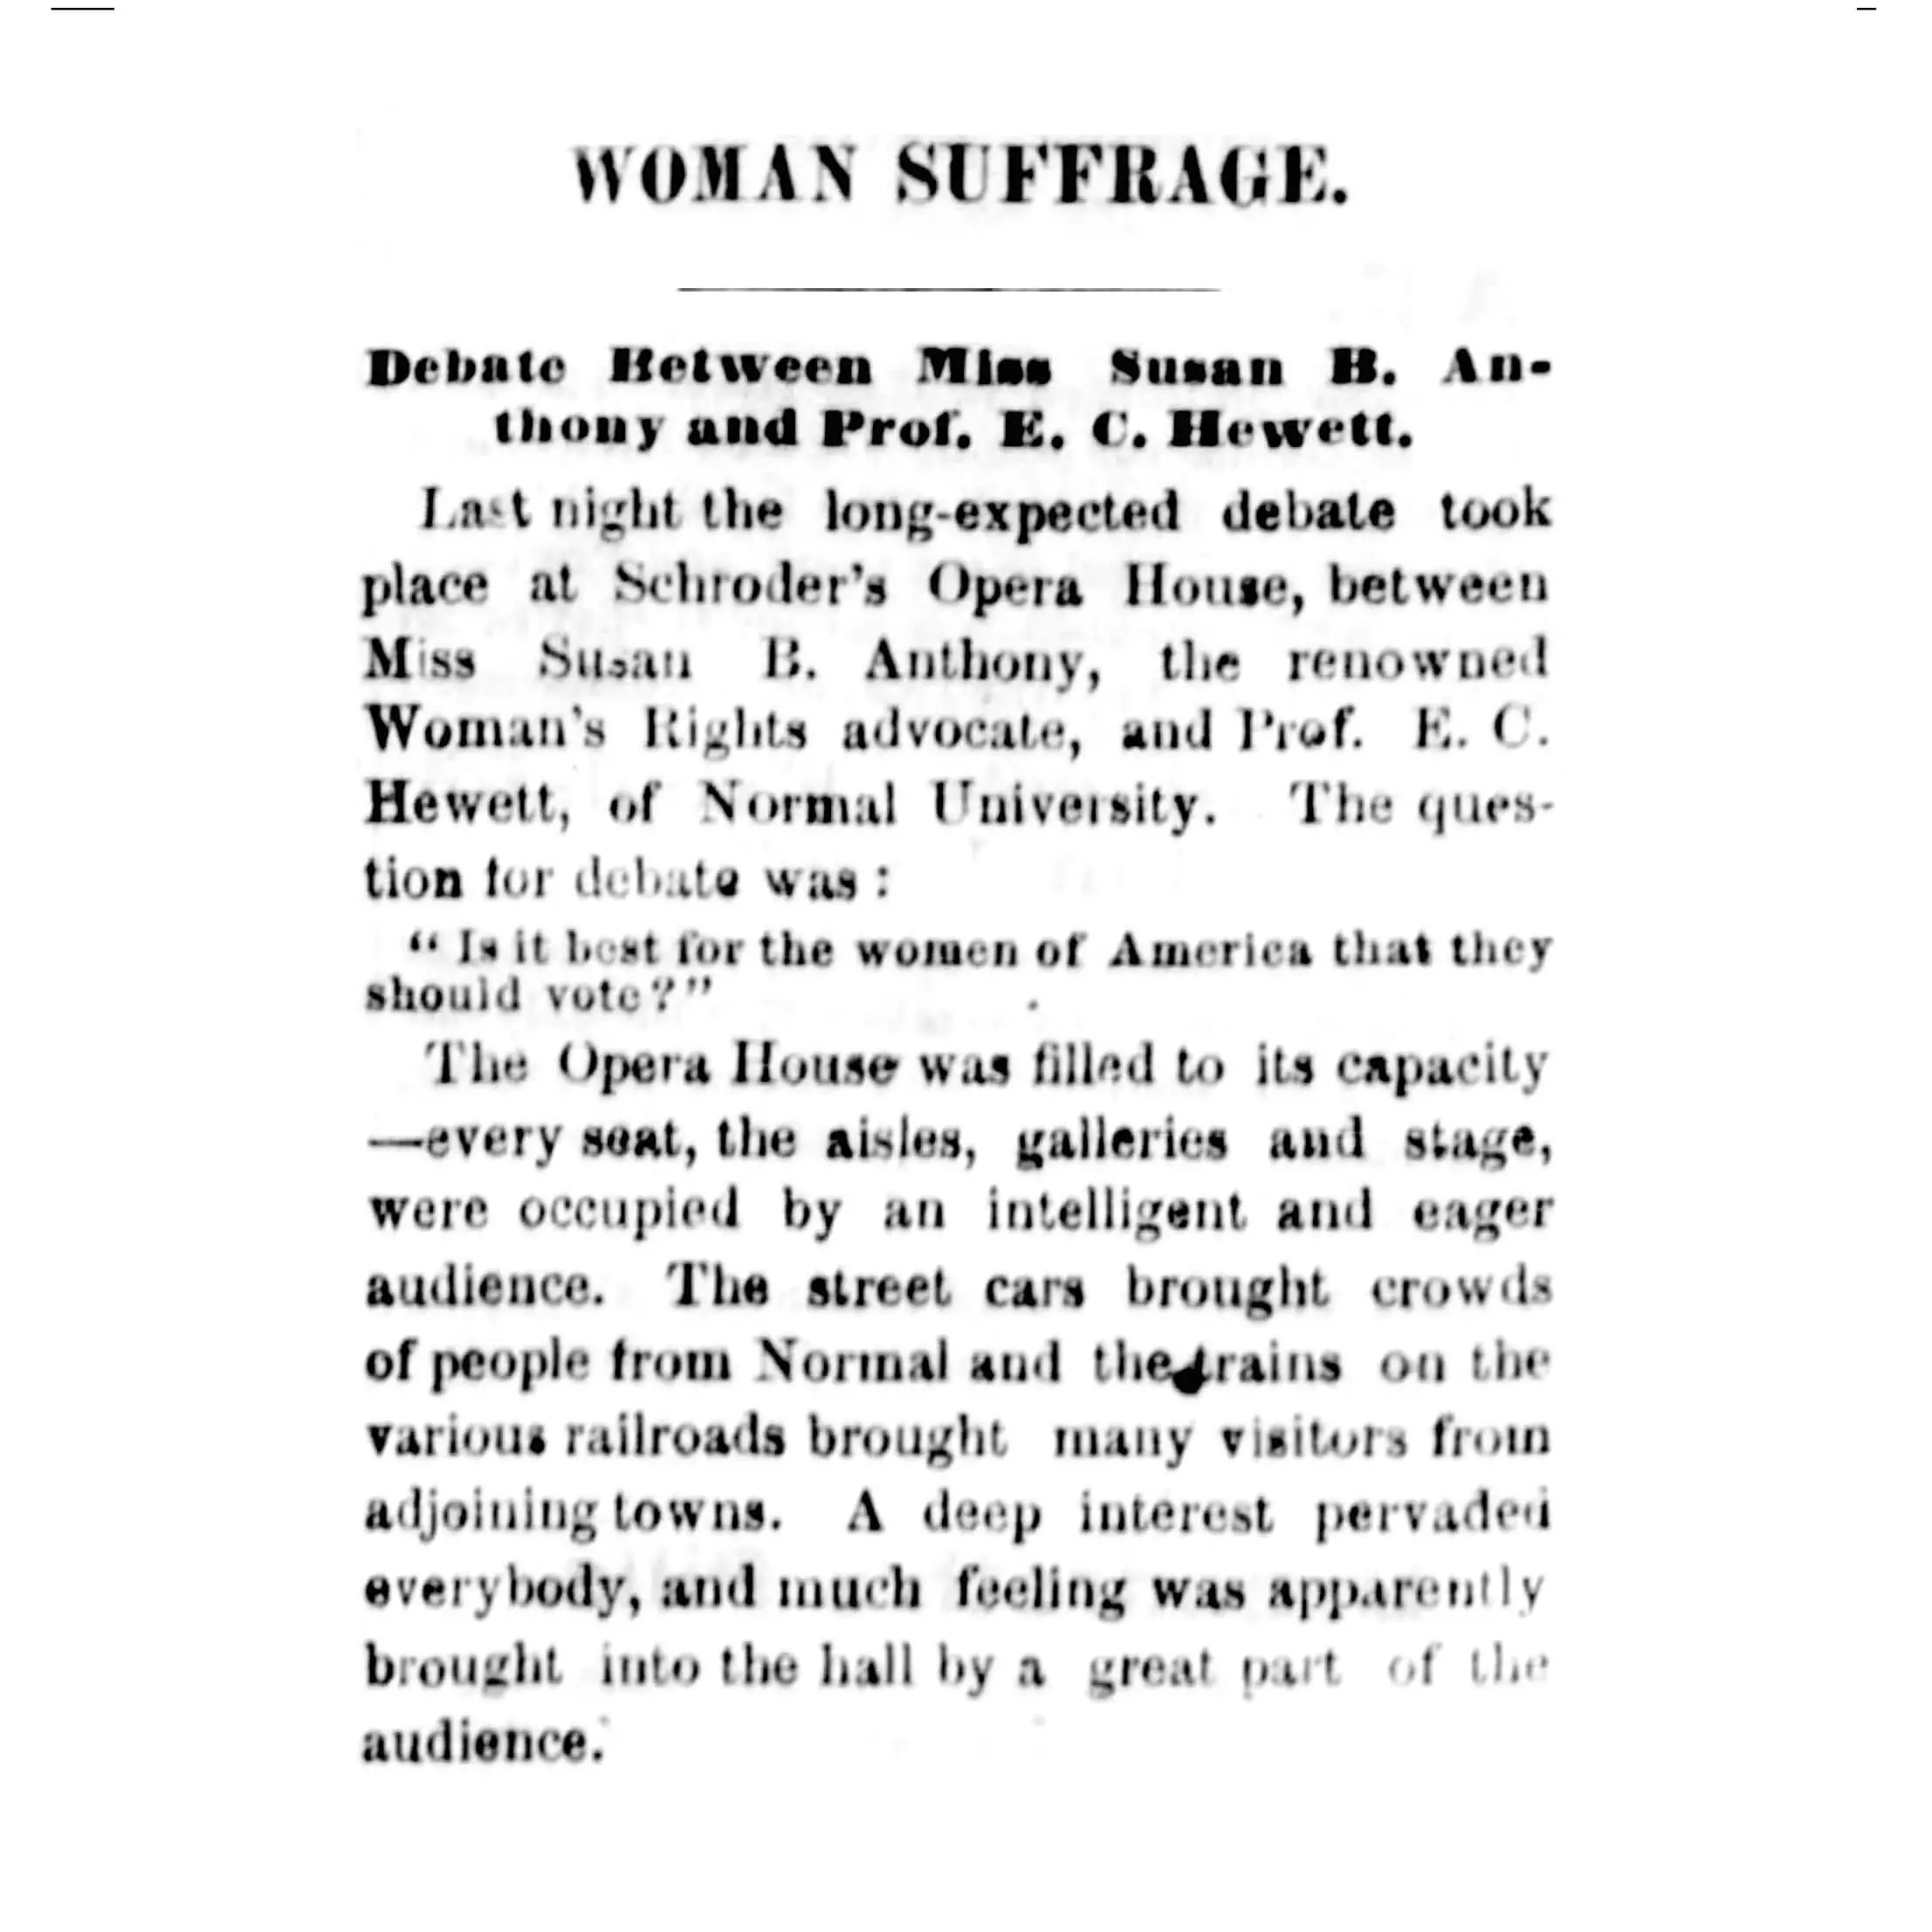 A newspaper clipping that details the efforts being made toward Women's Suffrage. The second paragraph reads the opera house was filled to its capacity -- every seat, aisles, galleries, and stage, were occupied by an intelligent eager audience.